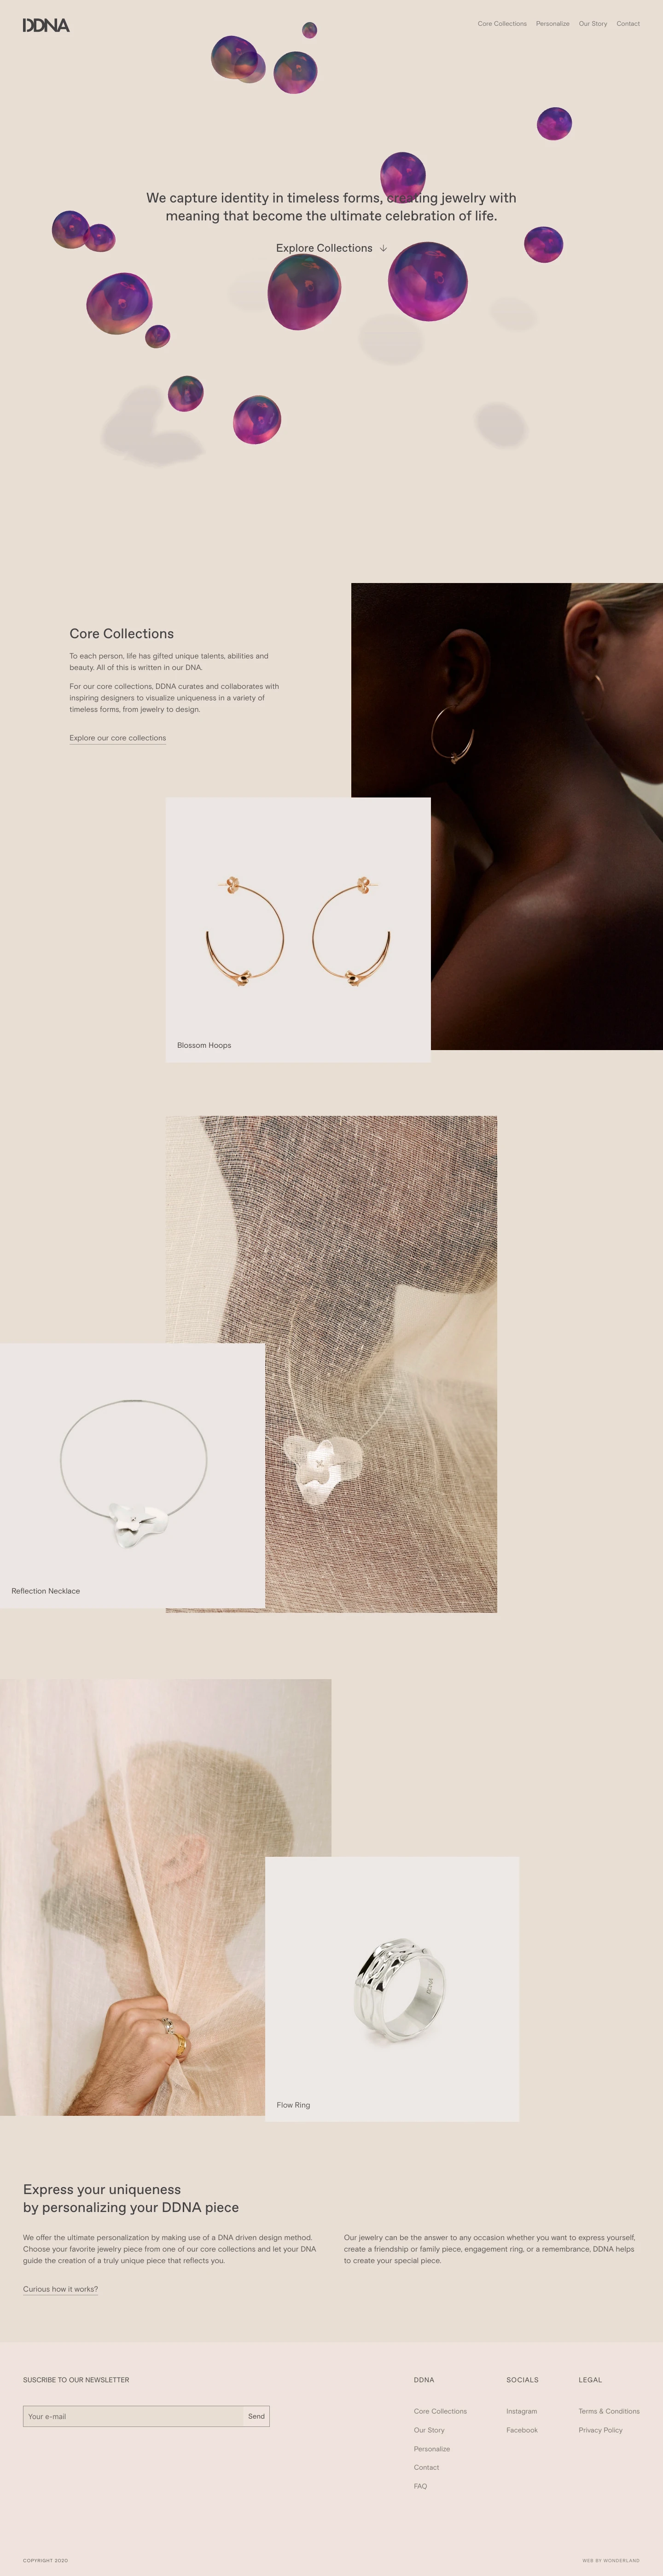 DDNA Landing Page Example: DDNA captures identity in timeless forms , creating jewelry with meaning that become the ultimate celebration of life.